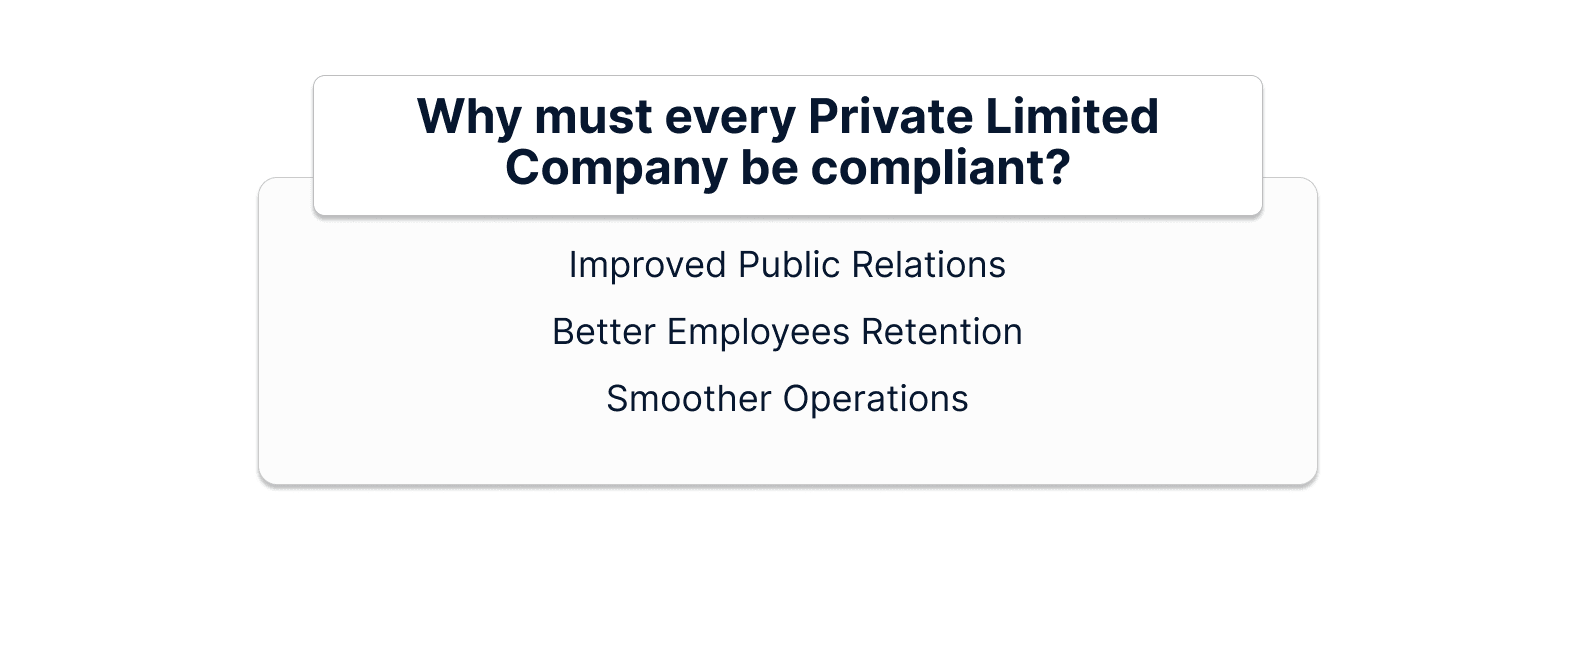 Why must every Private Limited Company be compliant?